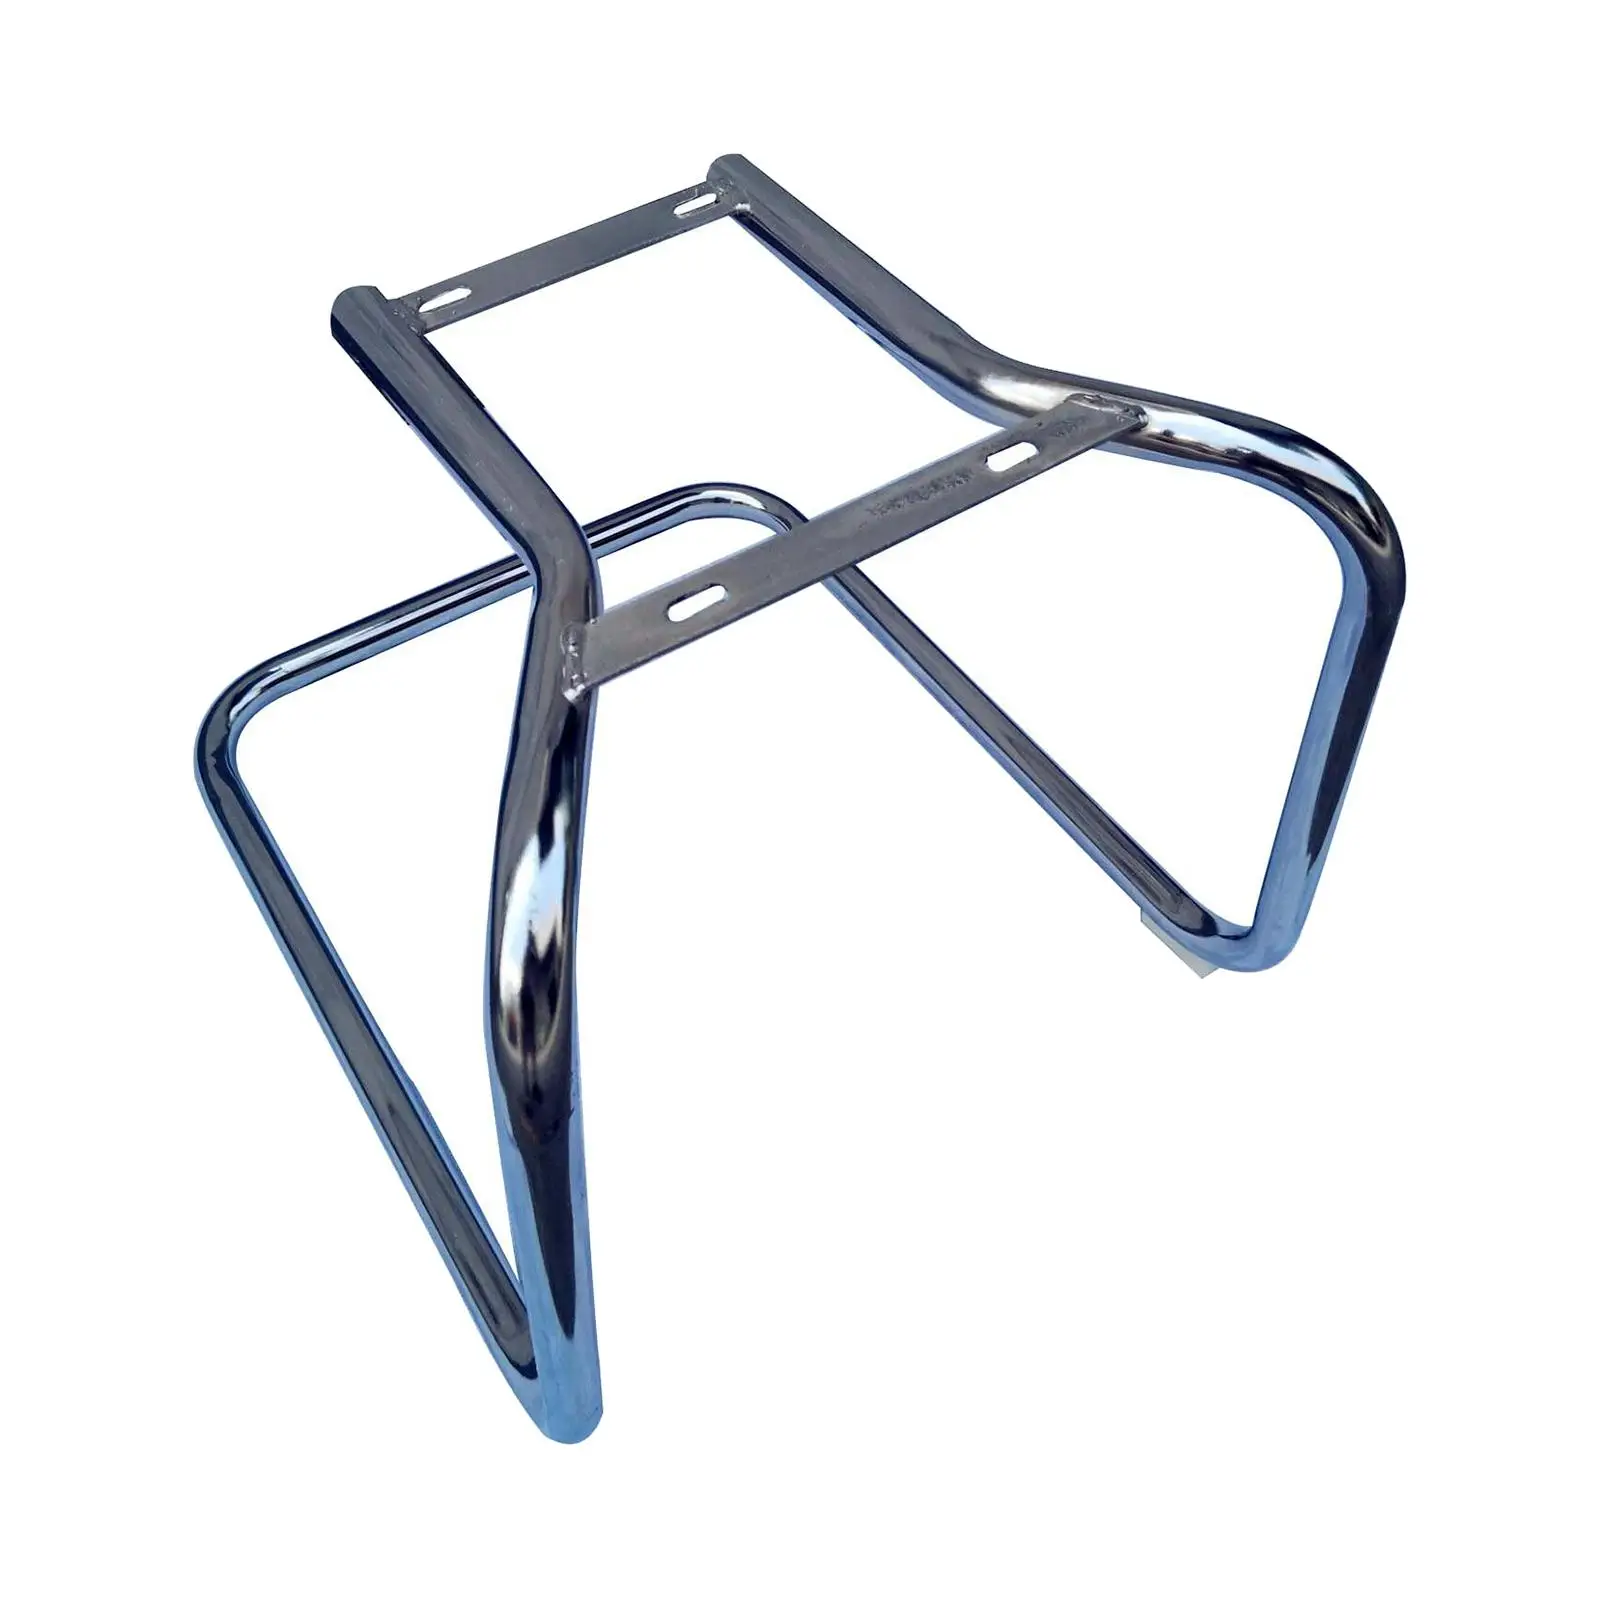 Heavy Duty Furniture Accessories Steel Cantilever Chair Base for Game Chair Office Chair Computer Chairs Cantilever Chair